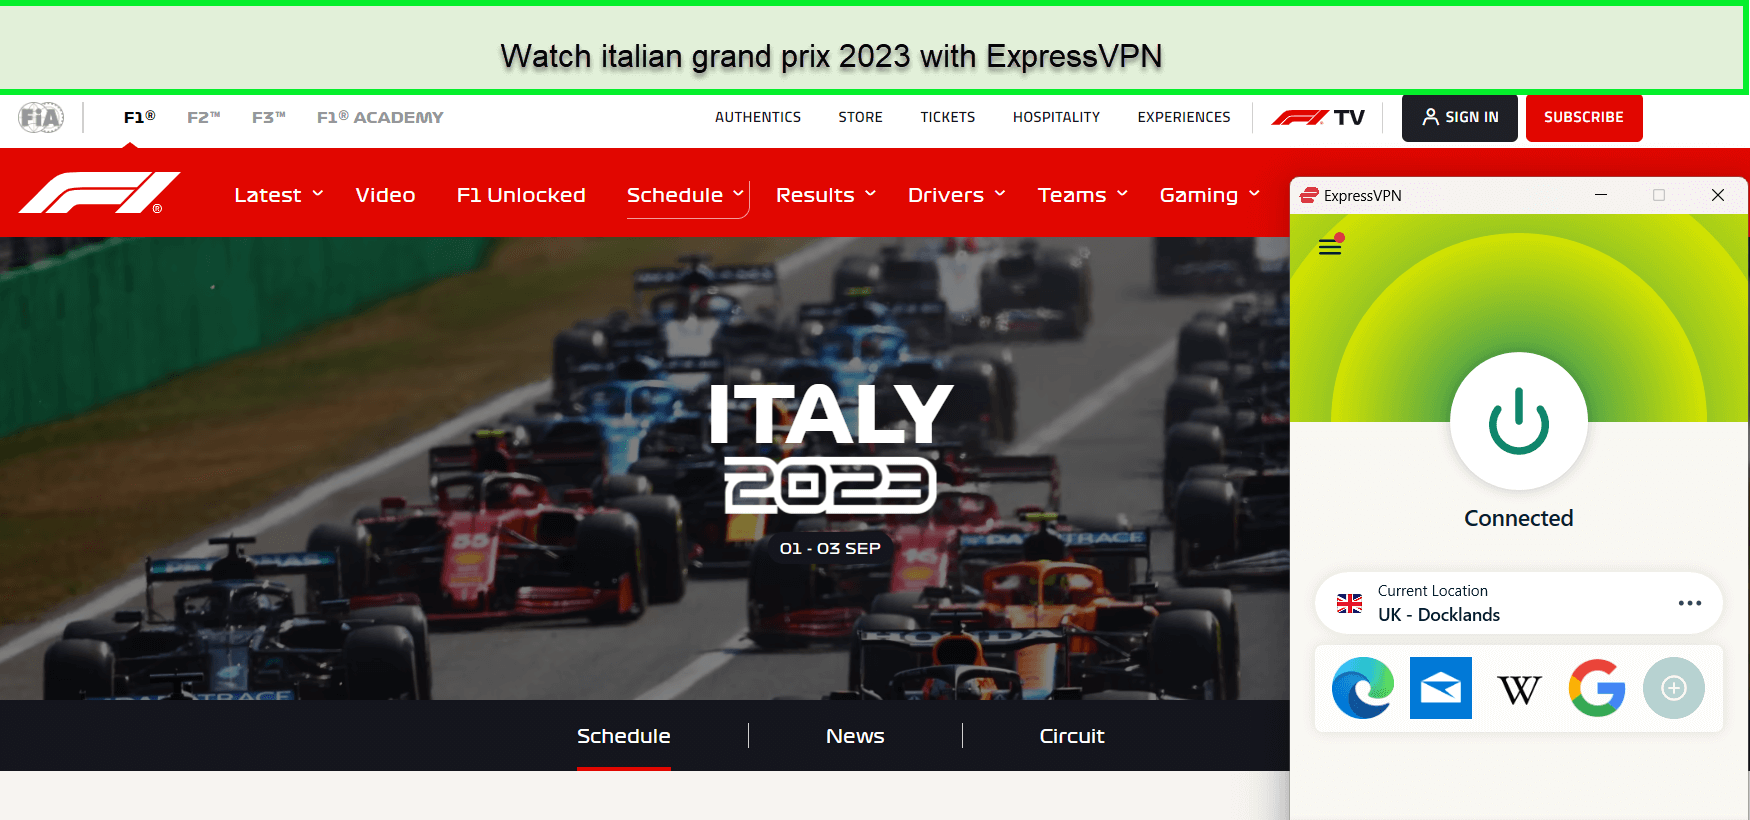 How-to-Watch-Italian-Grand-Prix-2023-in-Italy-on-ITV-with-ExpressVPN